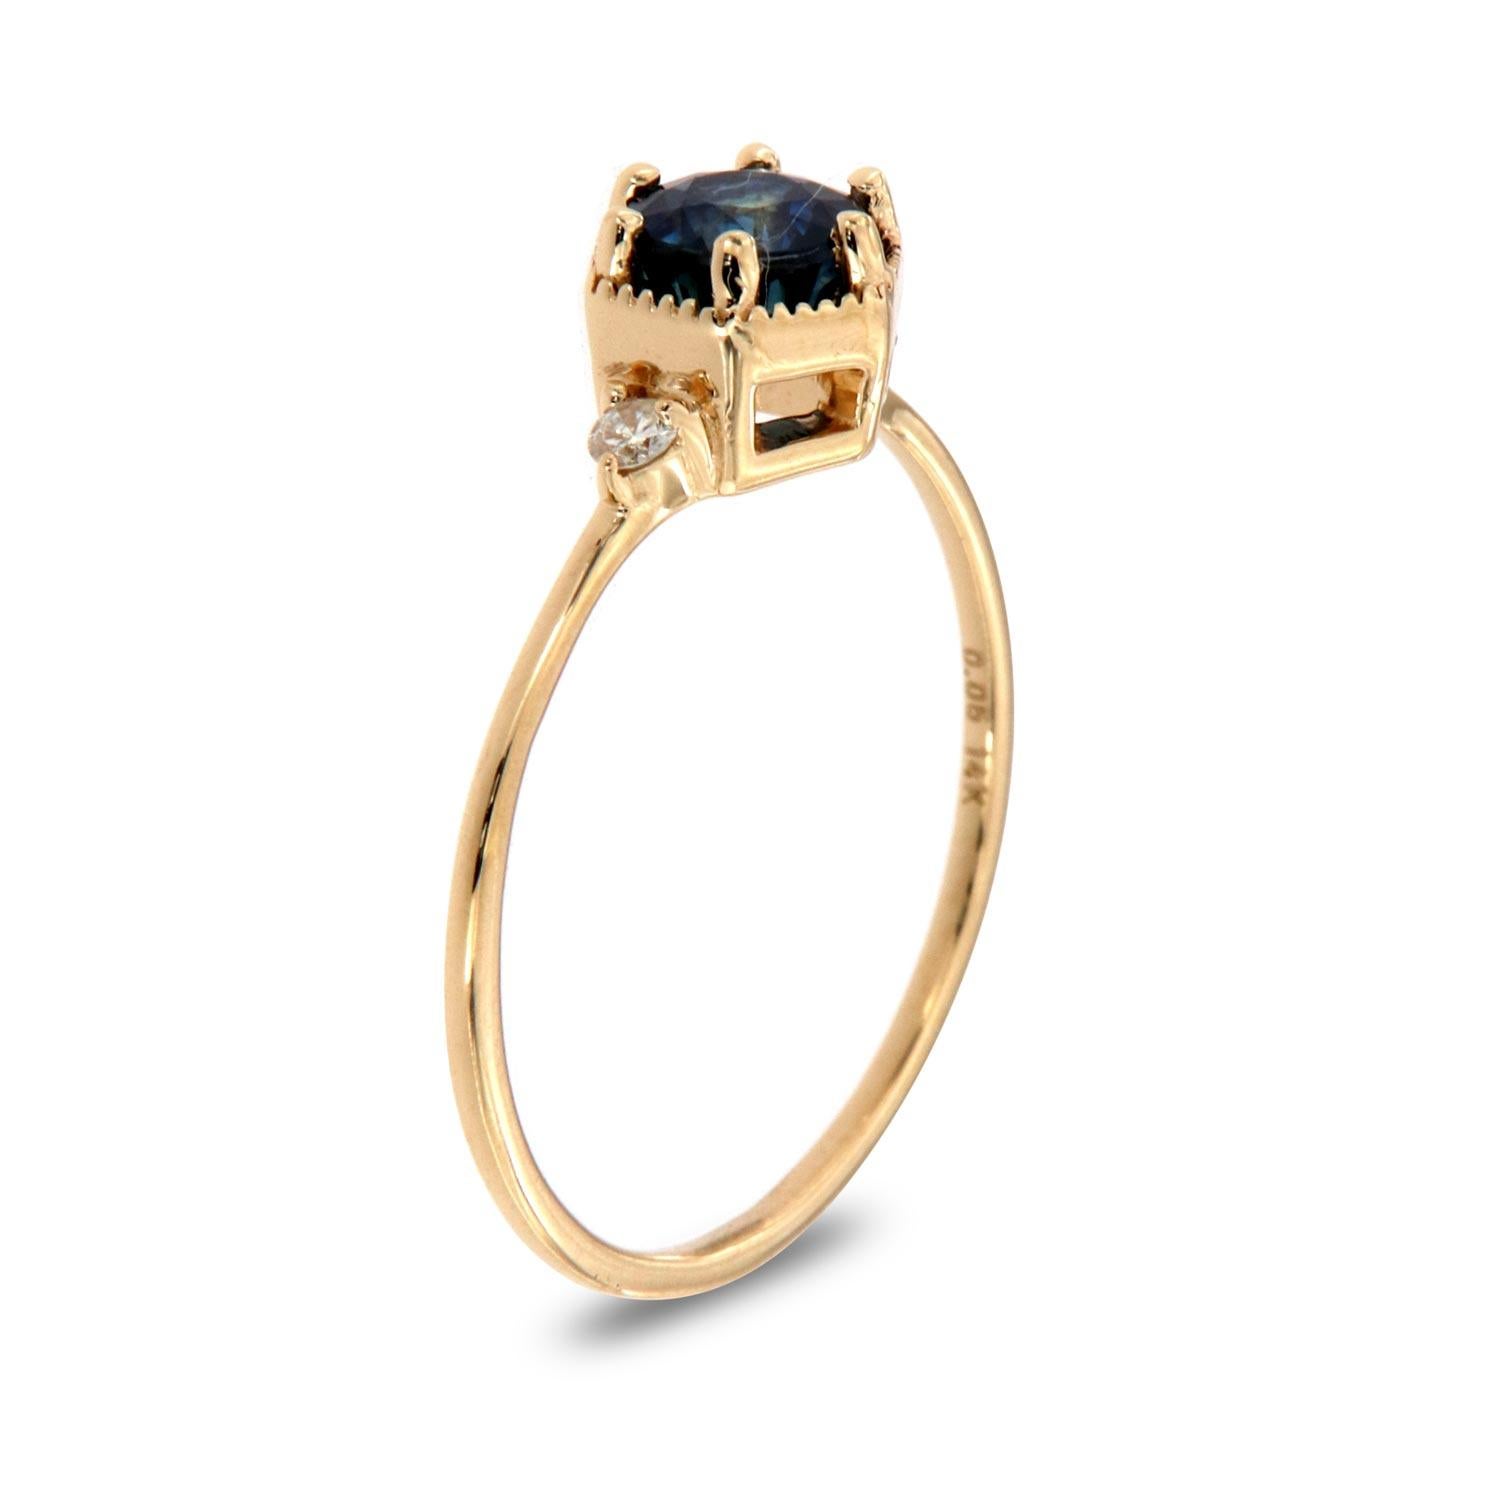 This petite organic designed rustic ring is impressive in its vintage appeal, featuring a natural blue round sapphire, accented with round brilliant diamonds. Experience the difference in person!

Product details: 

Center Gemstone Type: